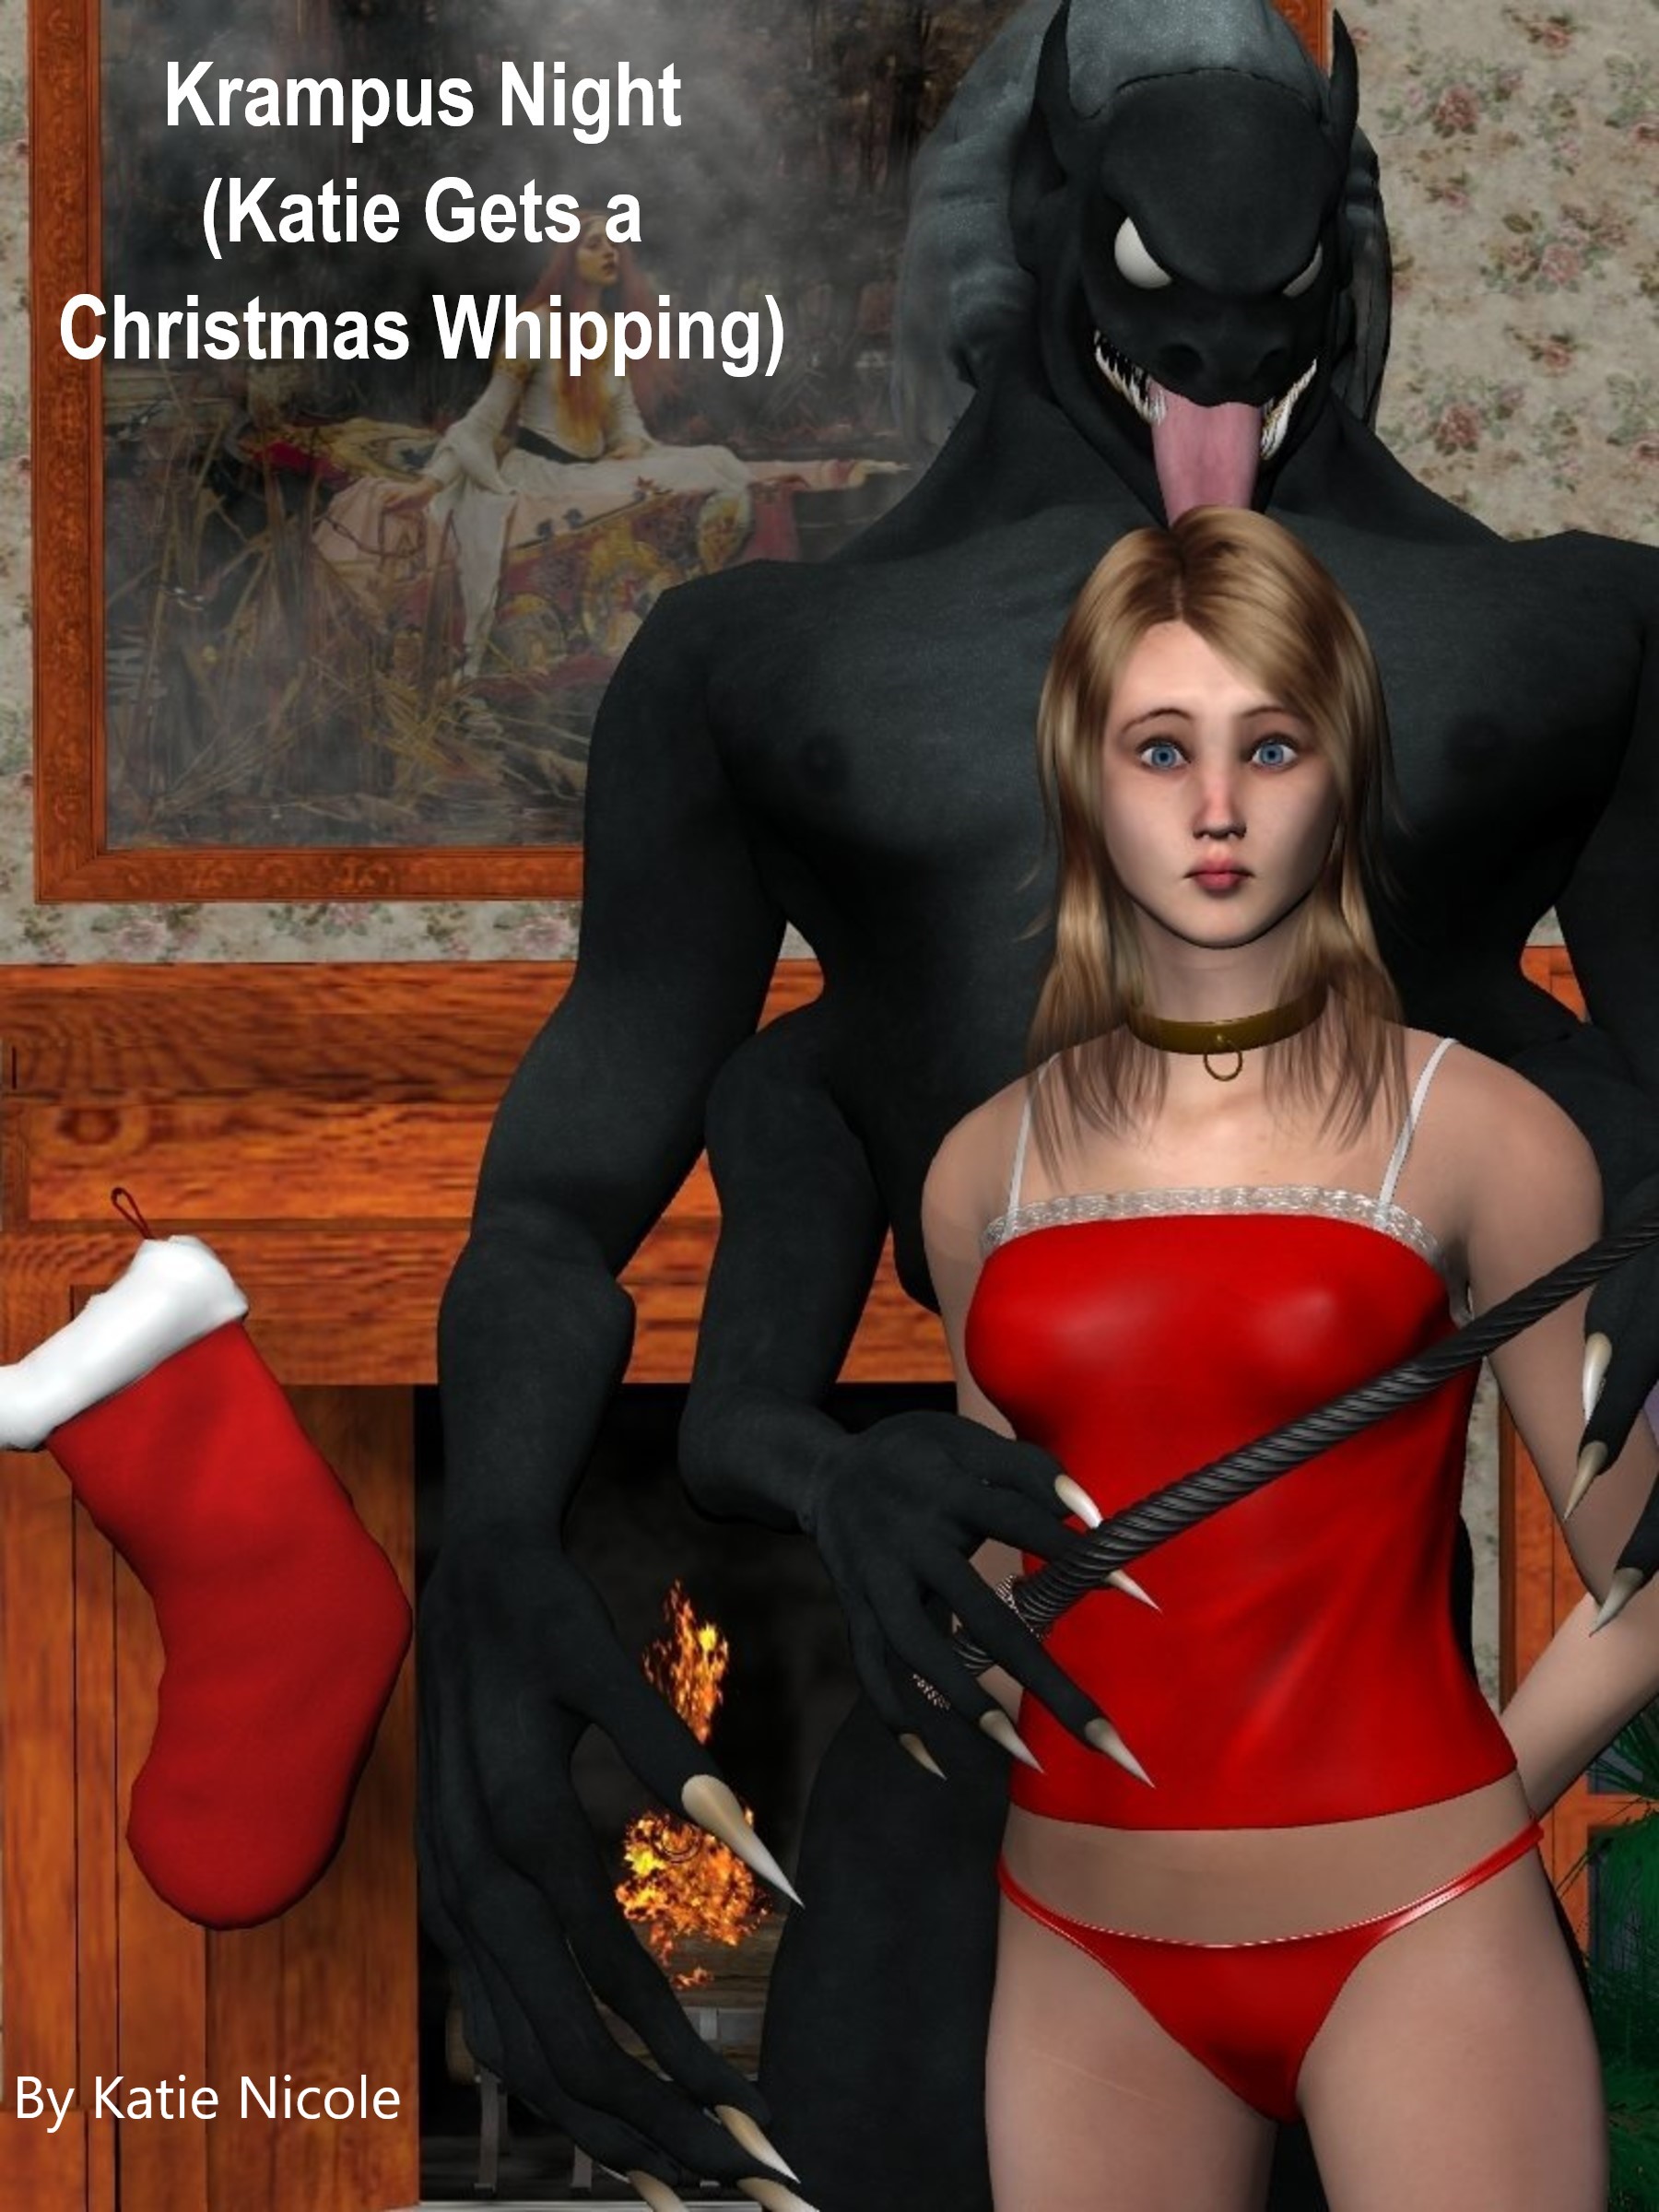 Spanked At Christmas Party - Krampus Night (Katie Gets a Christmas Whipping), an Ebook by Katie Nicole